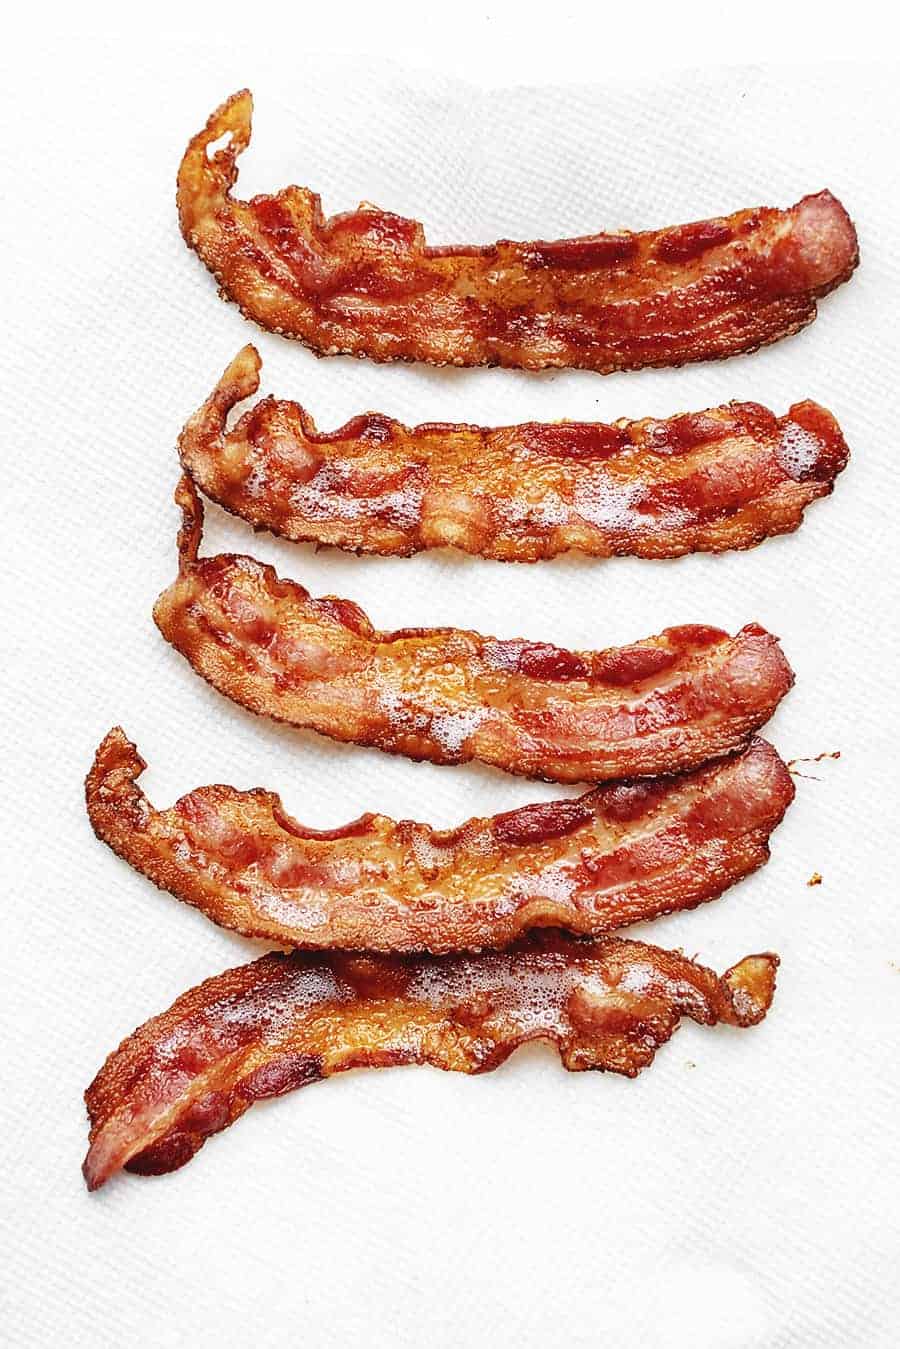 5 pieces of crispy bacon on paper towels